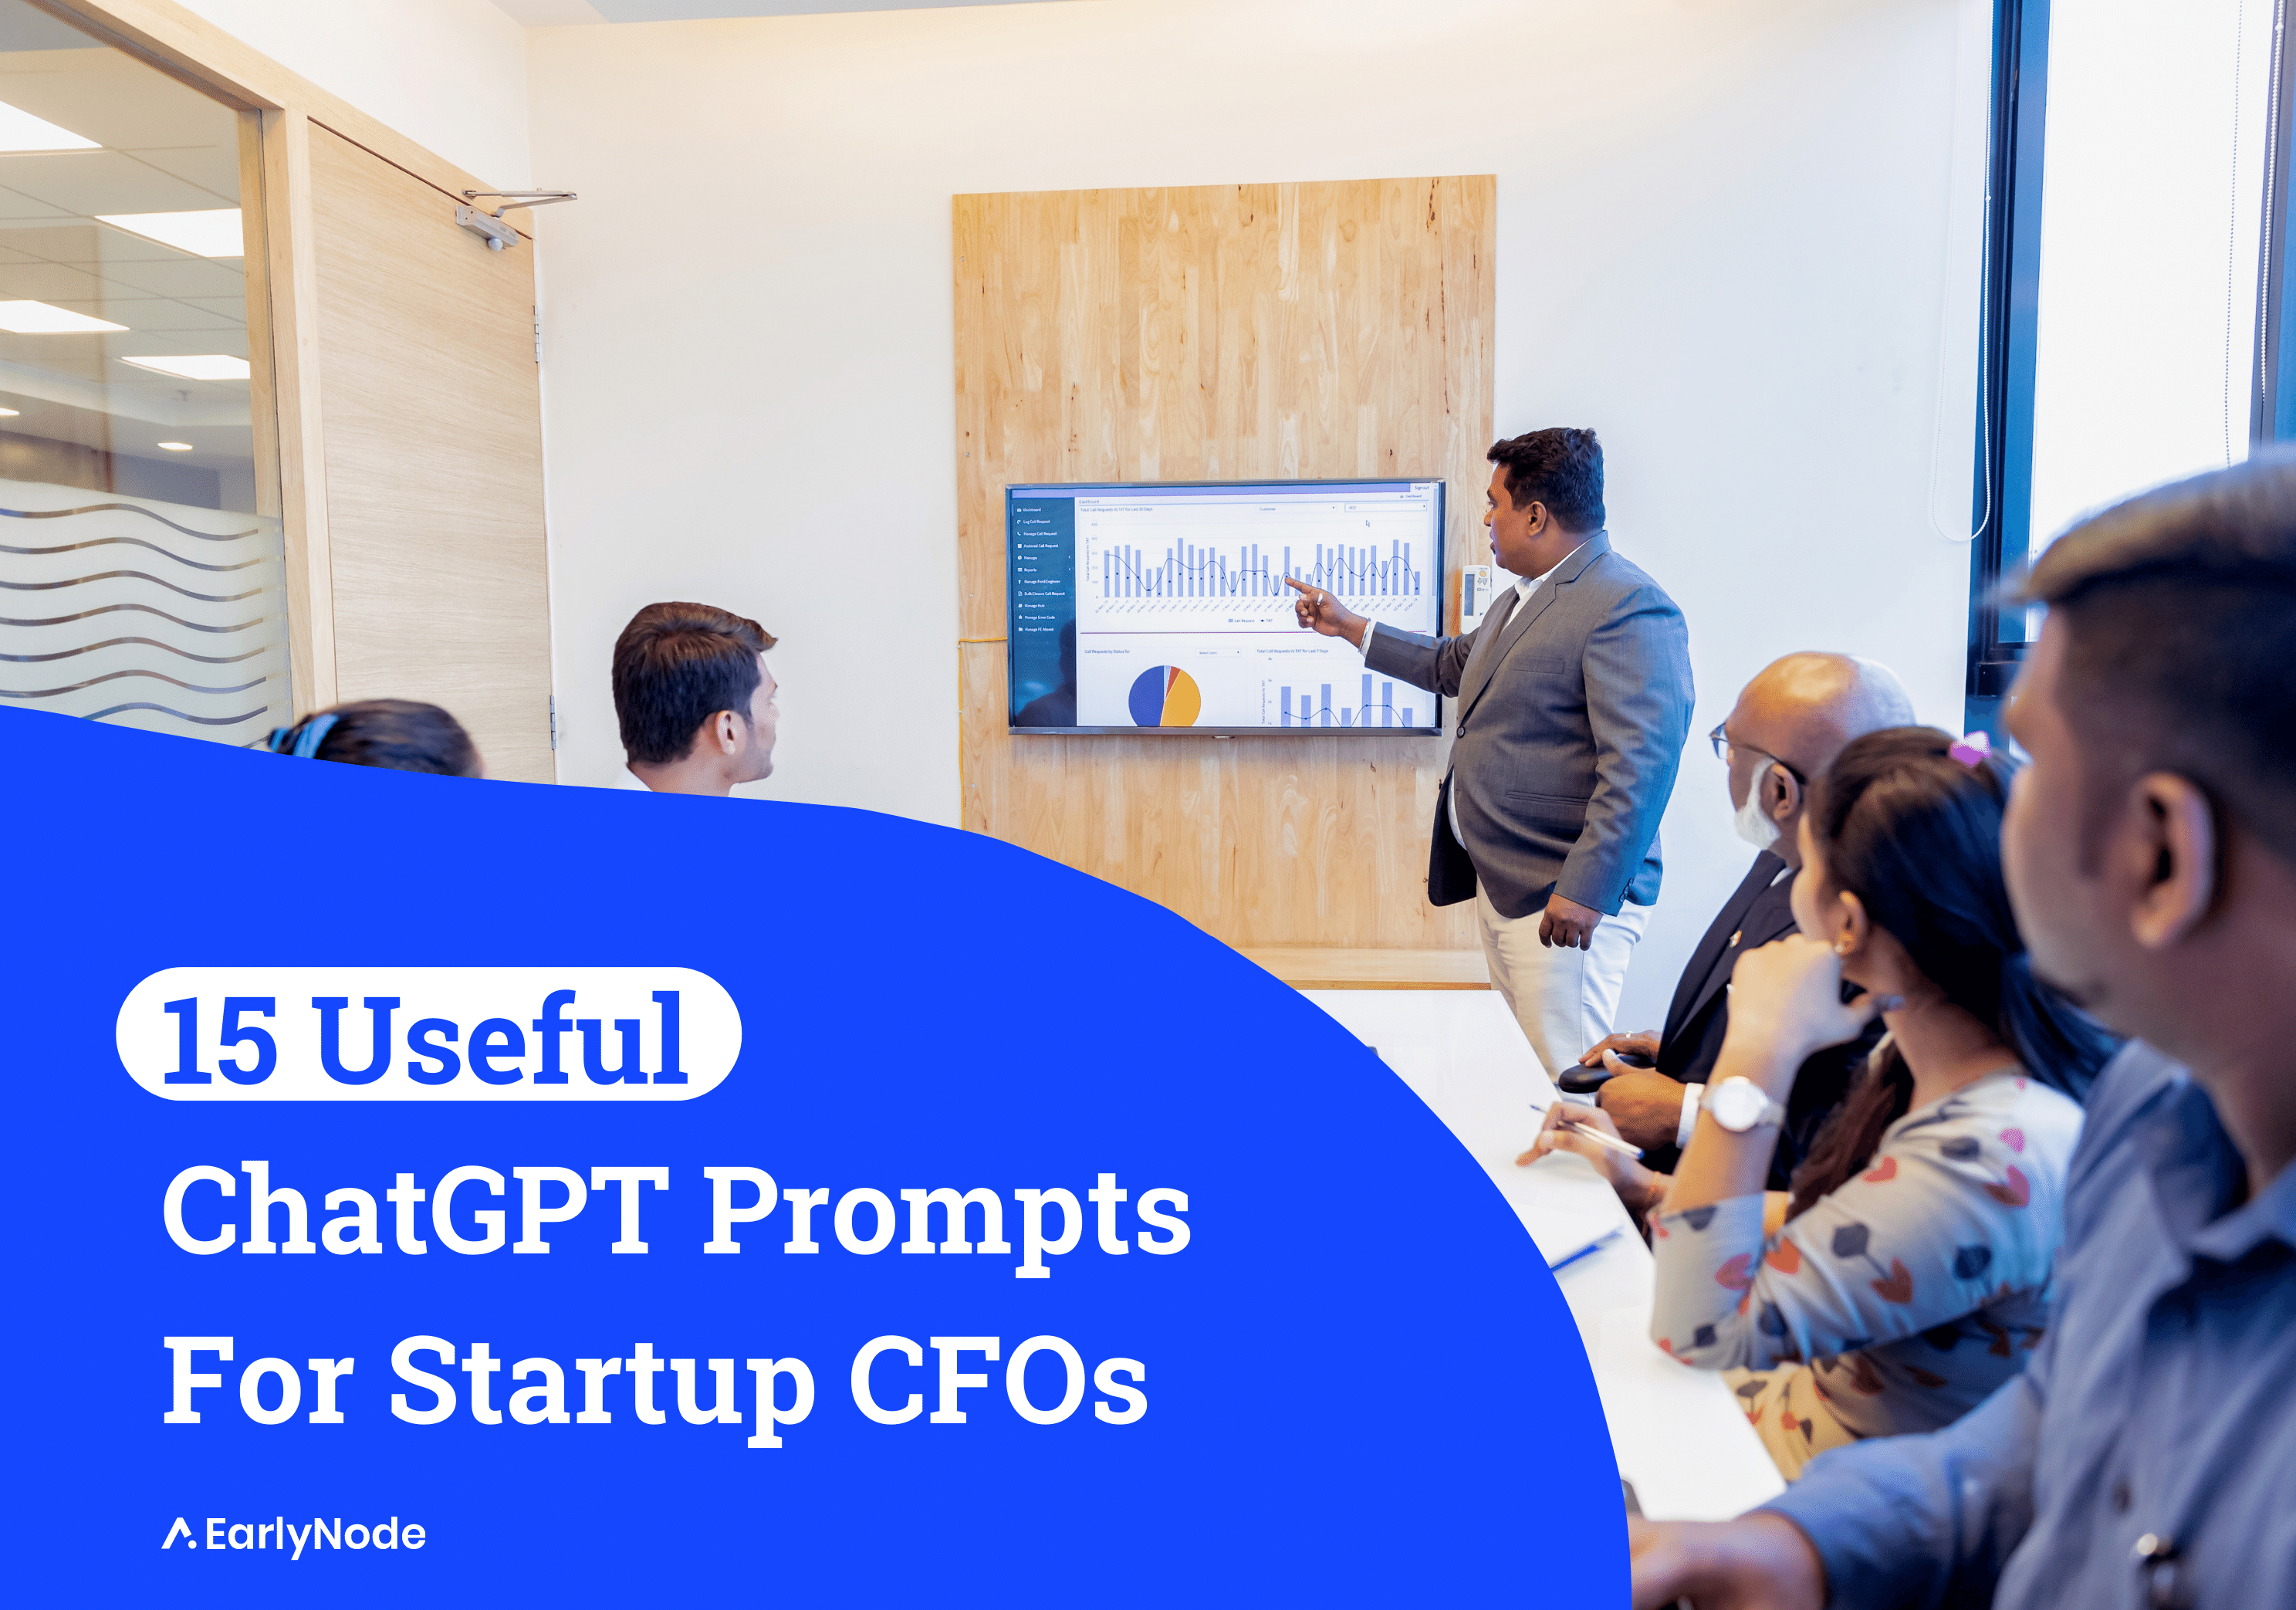 15 Tailor-Made ChatGPT Prompts for CFOs of Startups